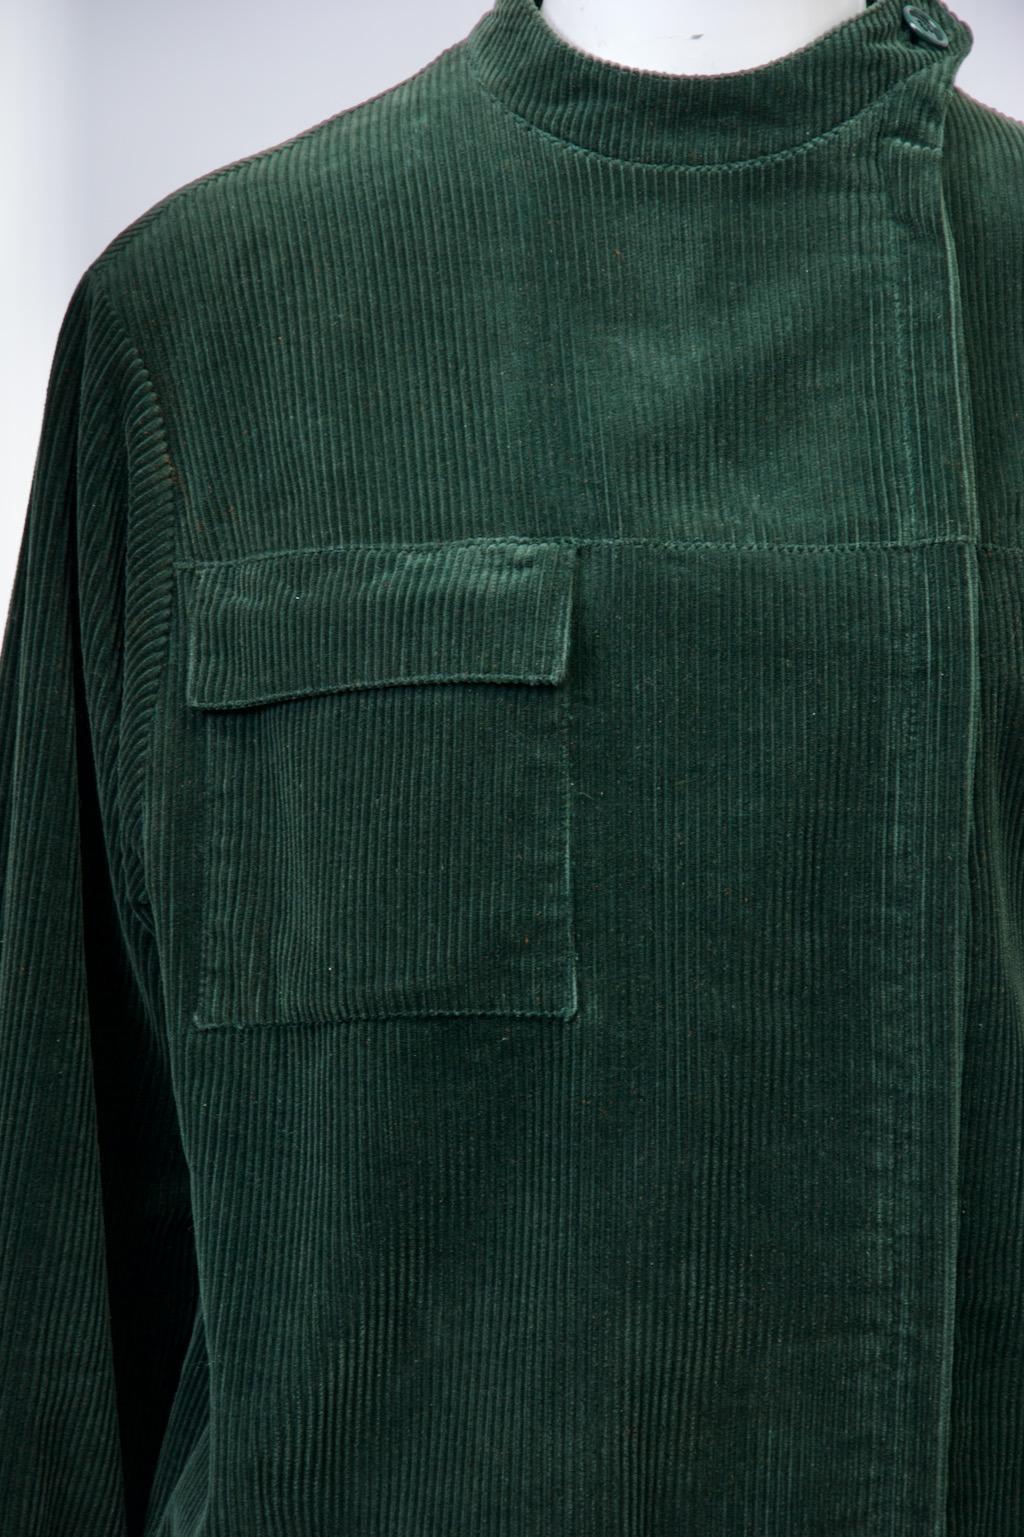 Franck Olivier hunter green corduroy jacket features an off-center zipper closure, mandarin collar, and coordinating knit hip and wrist bands. A patch pocket with flap at the top right if the jacket provides added interest. The mandarin collar